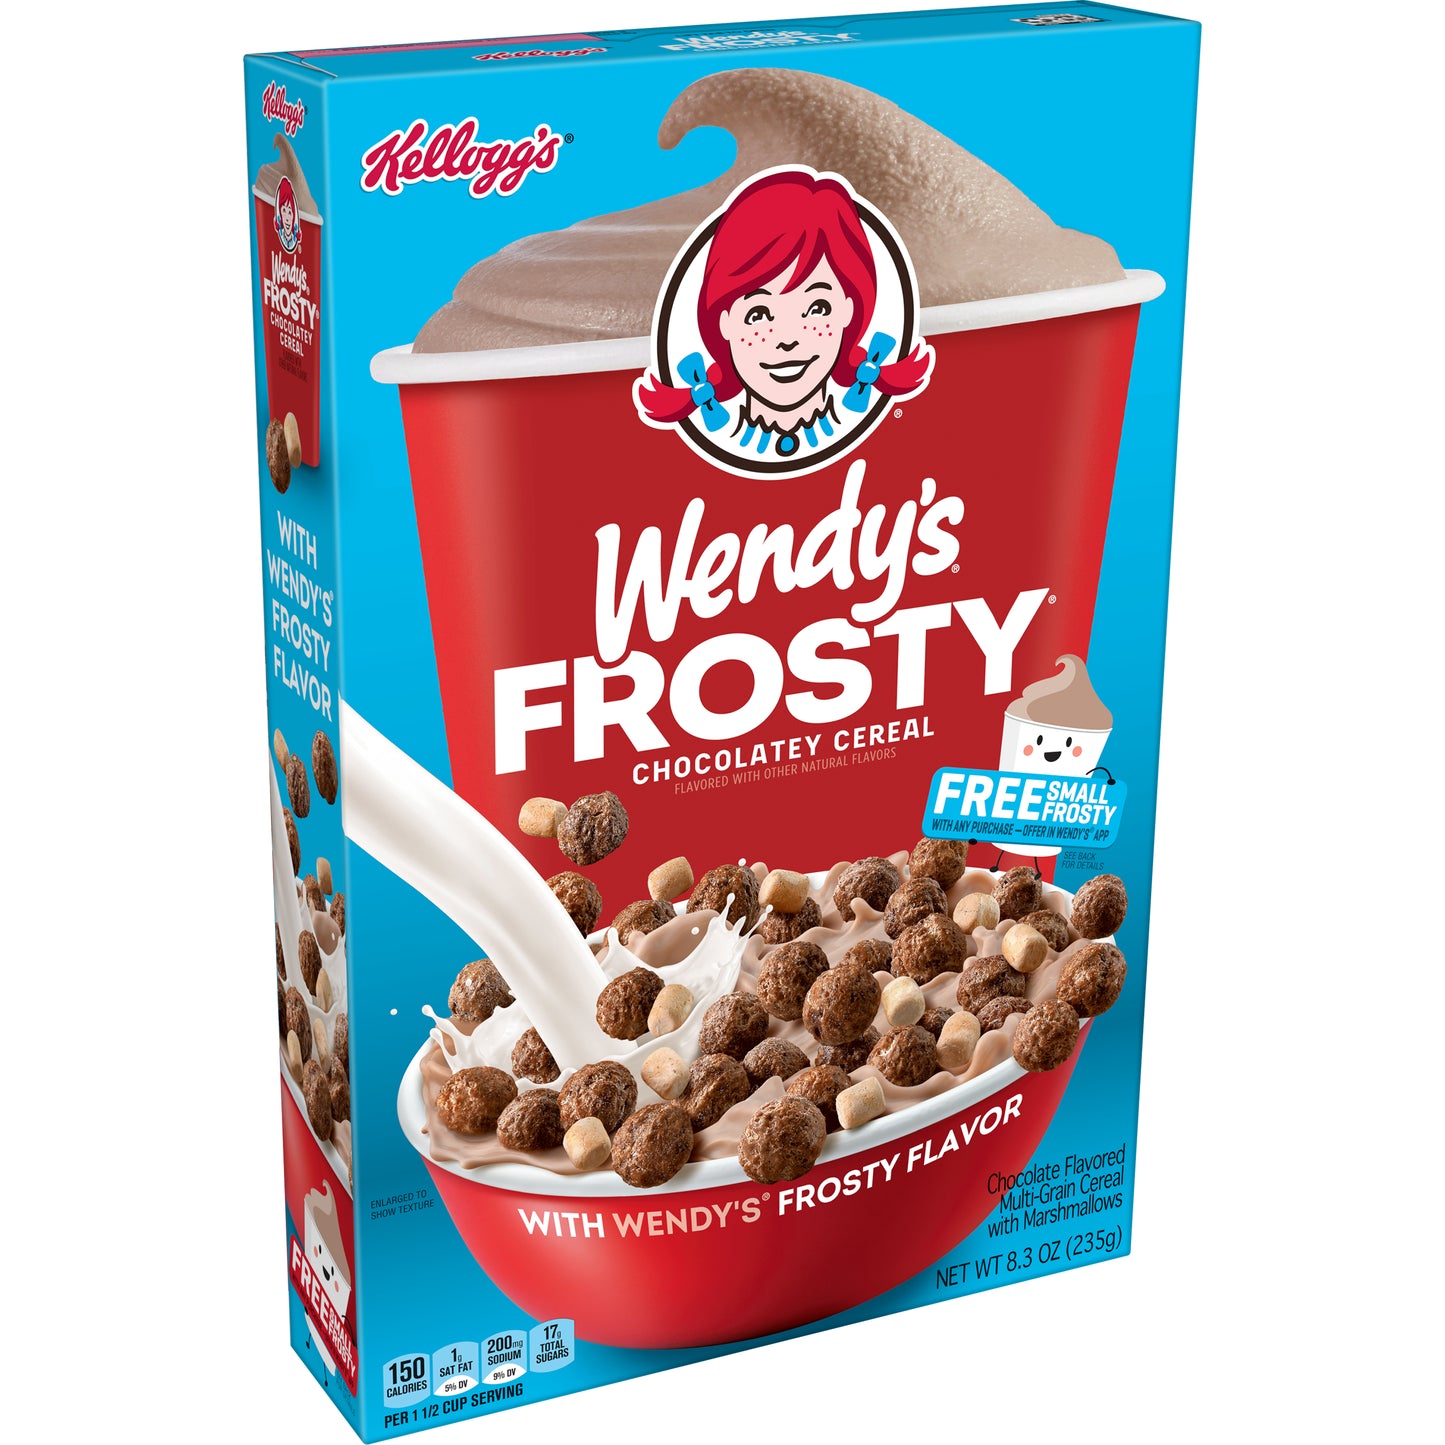 Wendy's Frosty Chocolate Cereal